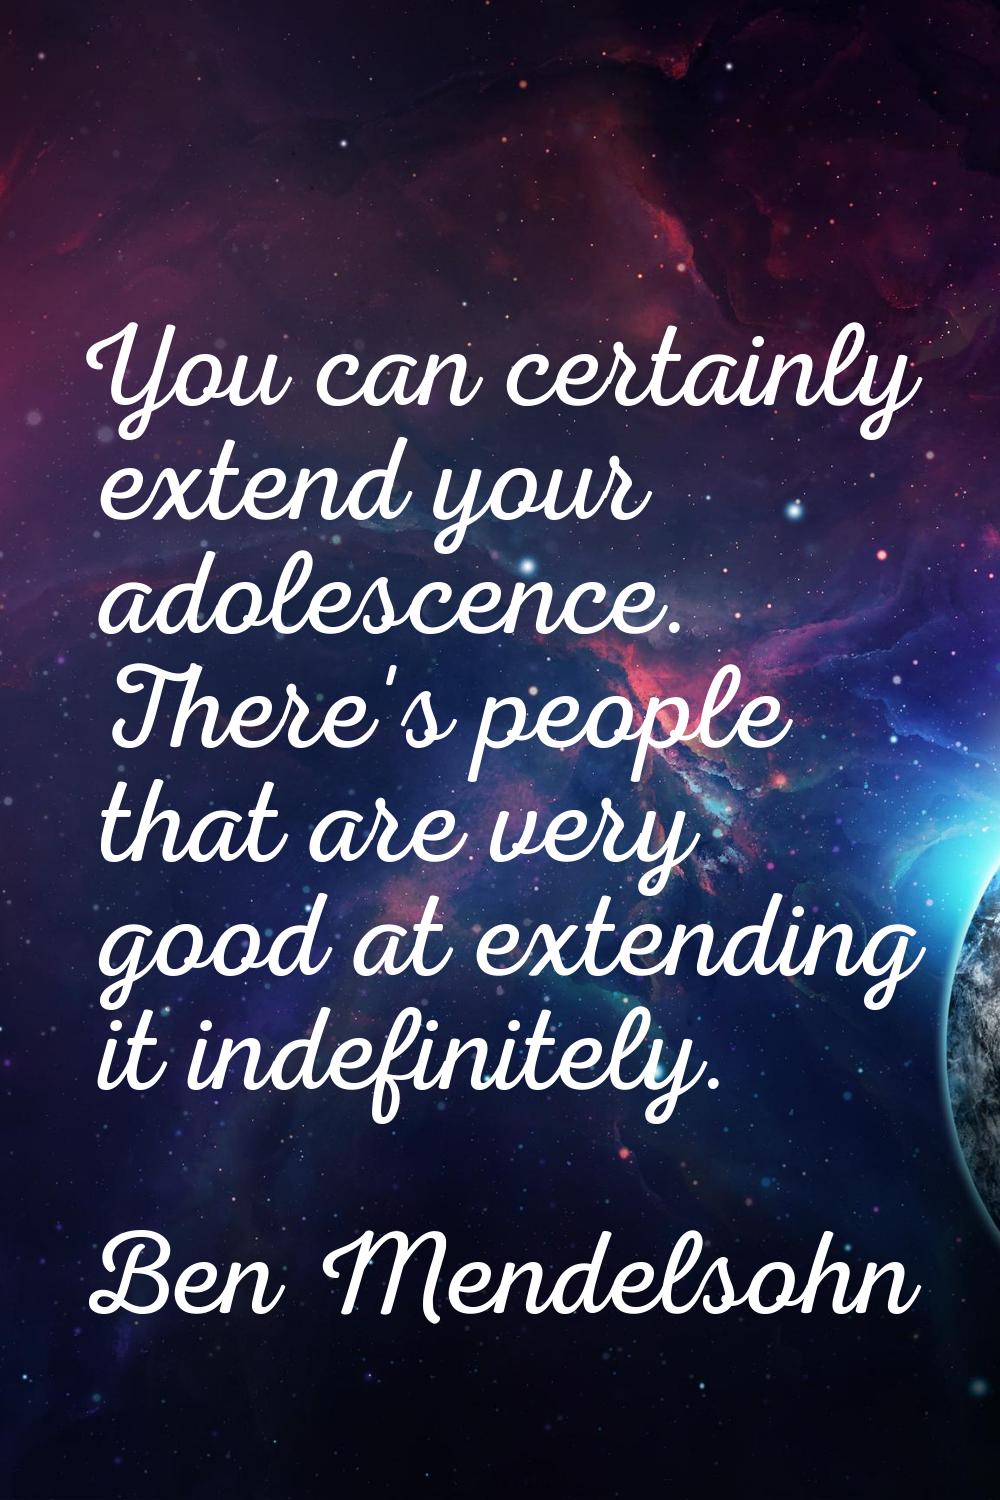 You can certainly extend your adolescence. There's people that are very good at extending it indefi